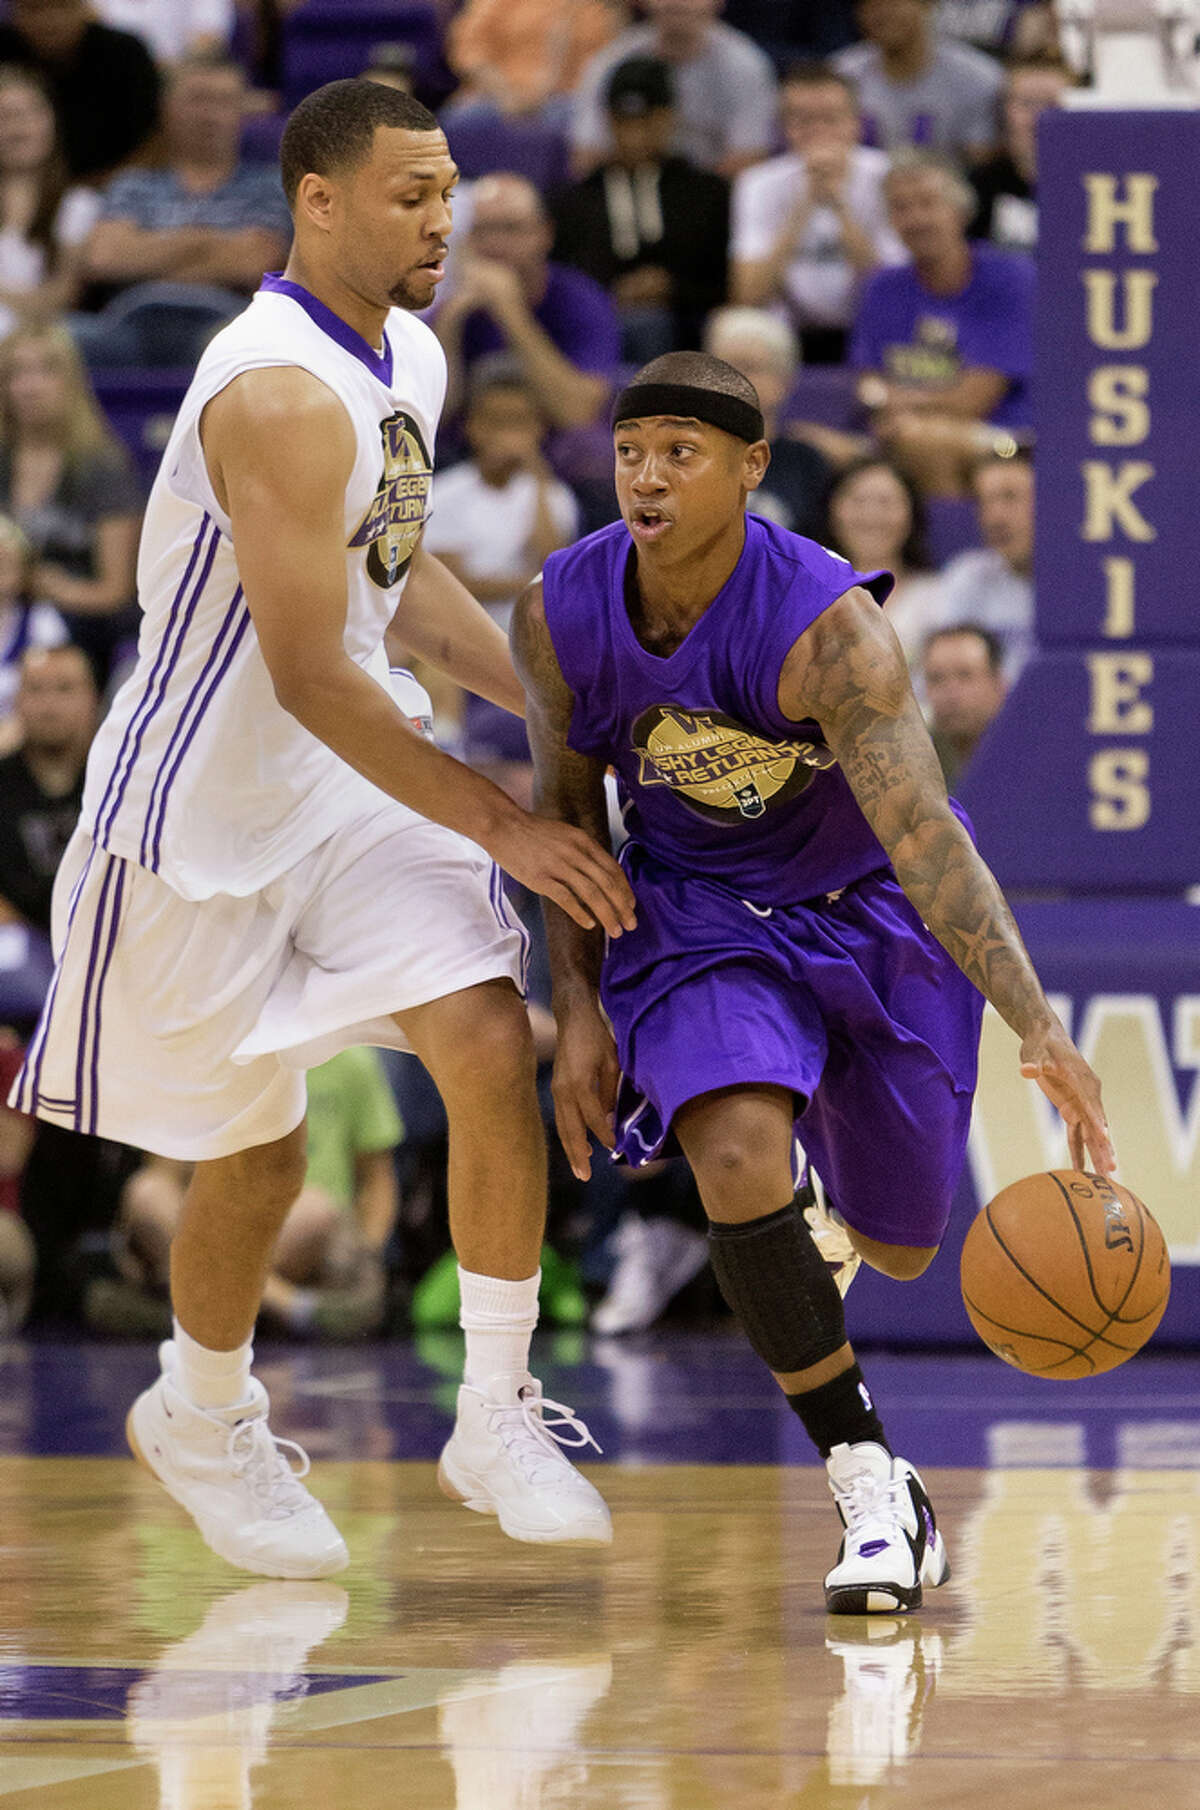 Isaiah Thomas, right, pushes past Brandon Roy, left, during the University of Washington Alumni Game Sunday, June 23, 2013, in the Alaska Airlines Arena at the University of Washington in Seattle, Wash. The after-2009 team, in purple, beat the pre-2009 team, in white, 107-104.